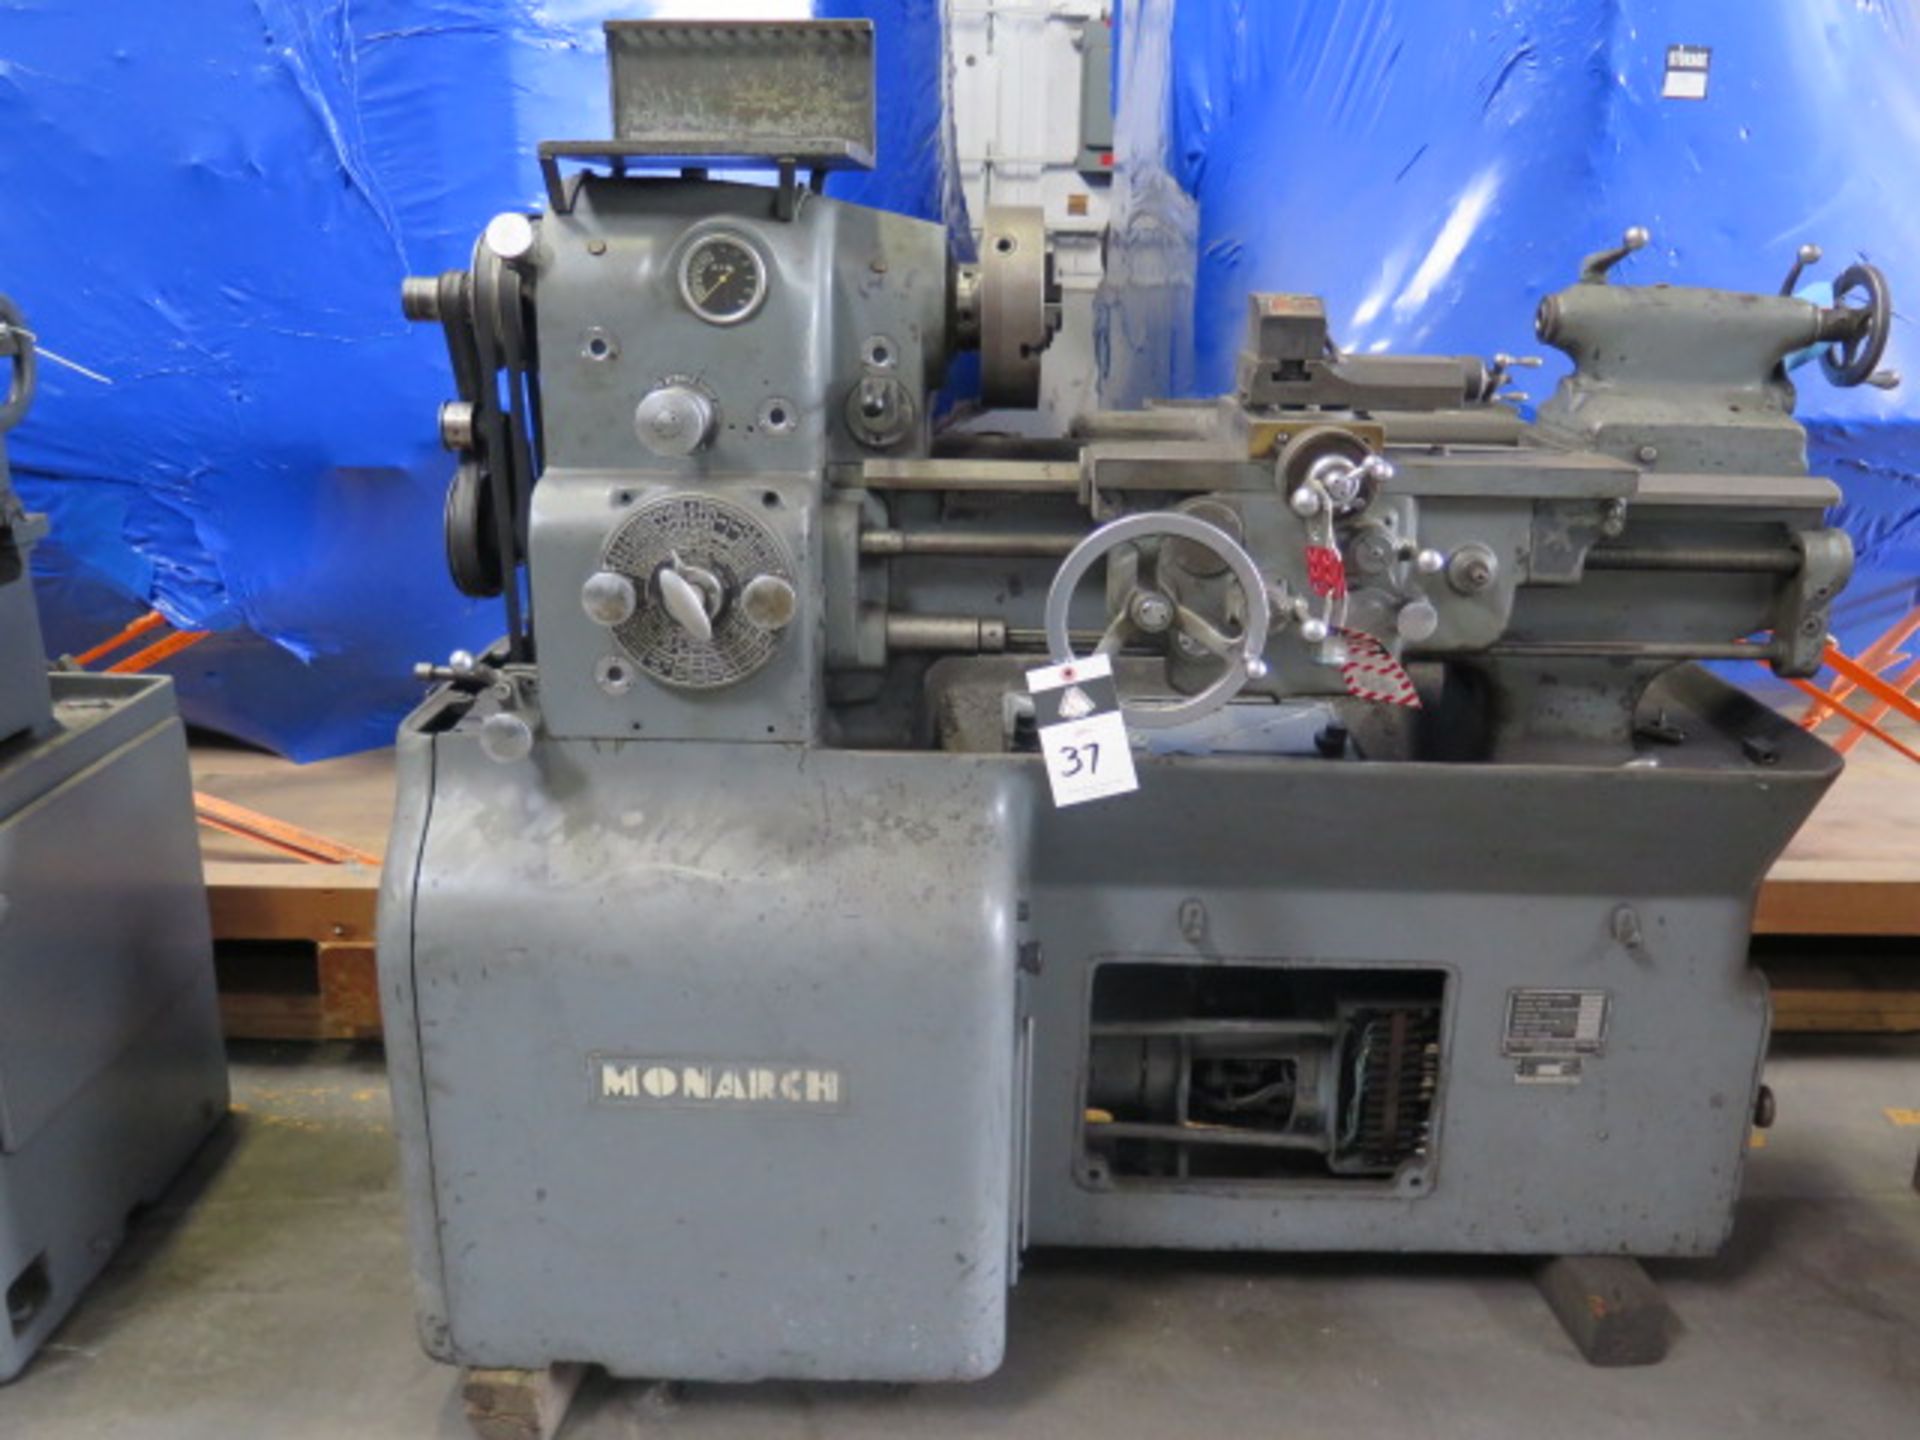 Monarch 10EE Tool Room Lathe s/n 11142 w/ 2500 RPM, Inch Threading, KDK Tool Post, SOLD AS IS